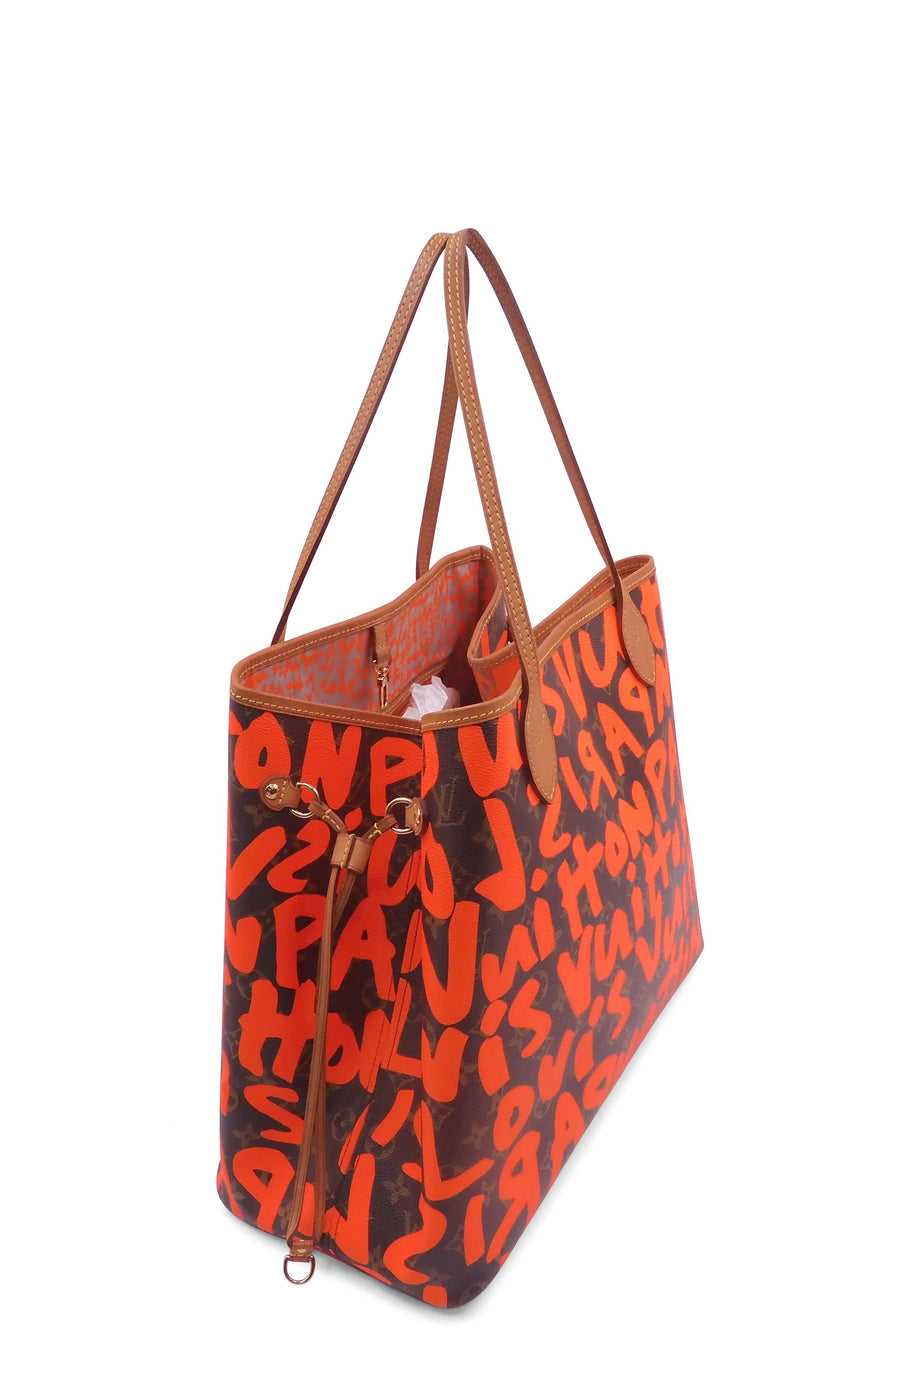 Authenticated used Louis Vuitton Louis Vuitton Monogram Graffiti Neverfull GM Tote Bag Orange M93702 Gold Hardware, Adult Unisex, Size: Weight: 795G /